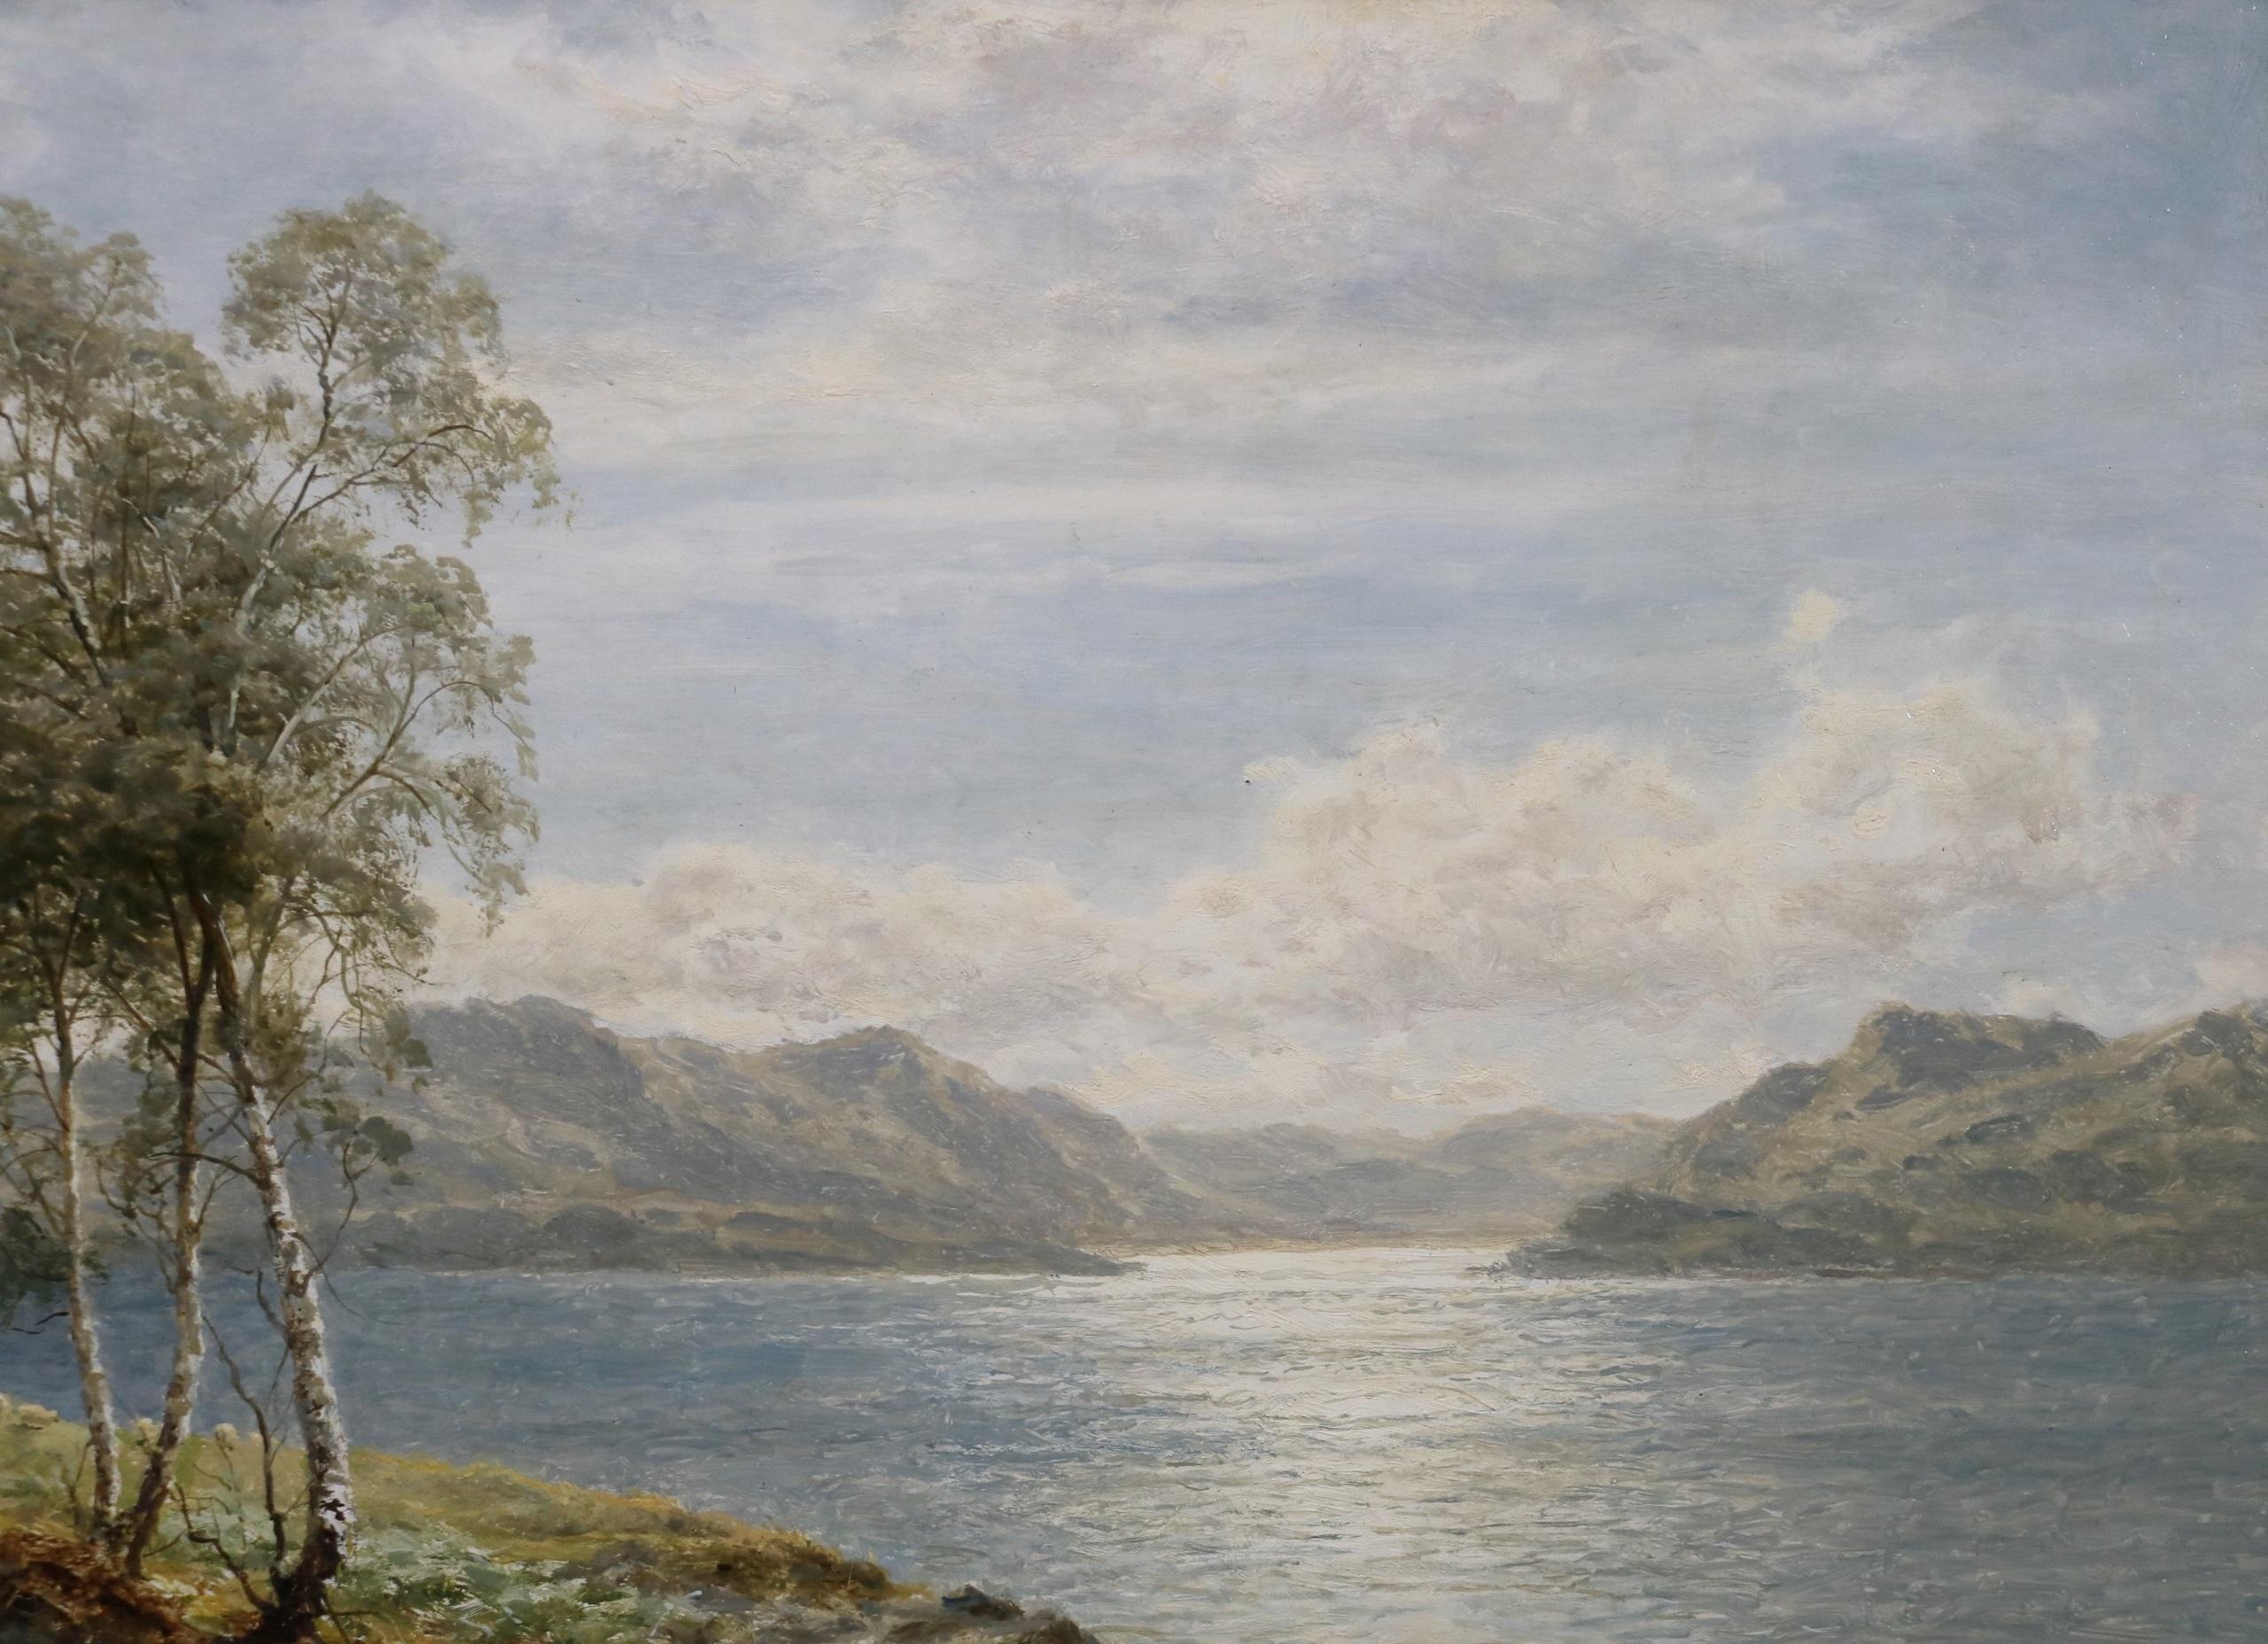 Edge of Derwentwater - Large English Lake District Sunset Landscape Oil Painting 3